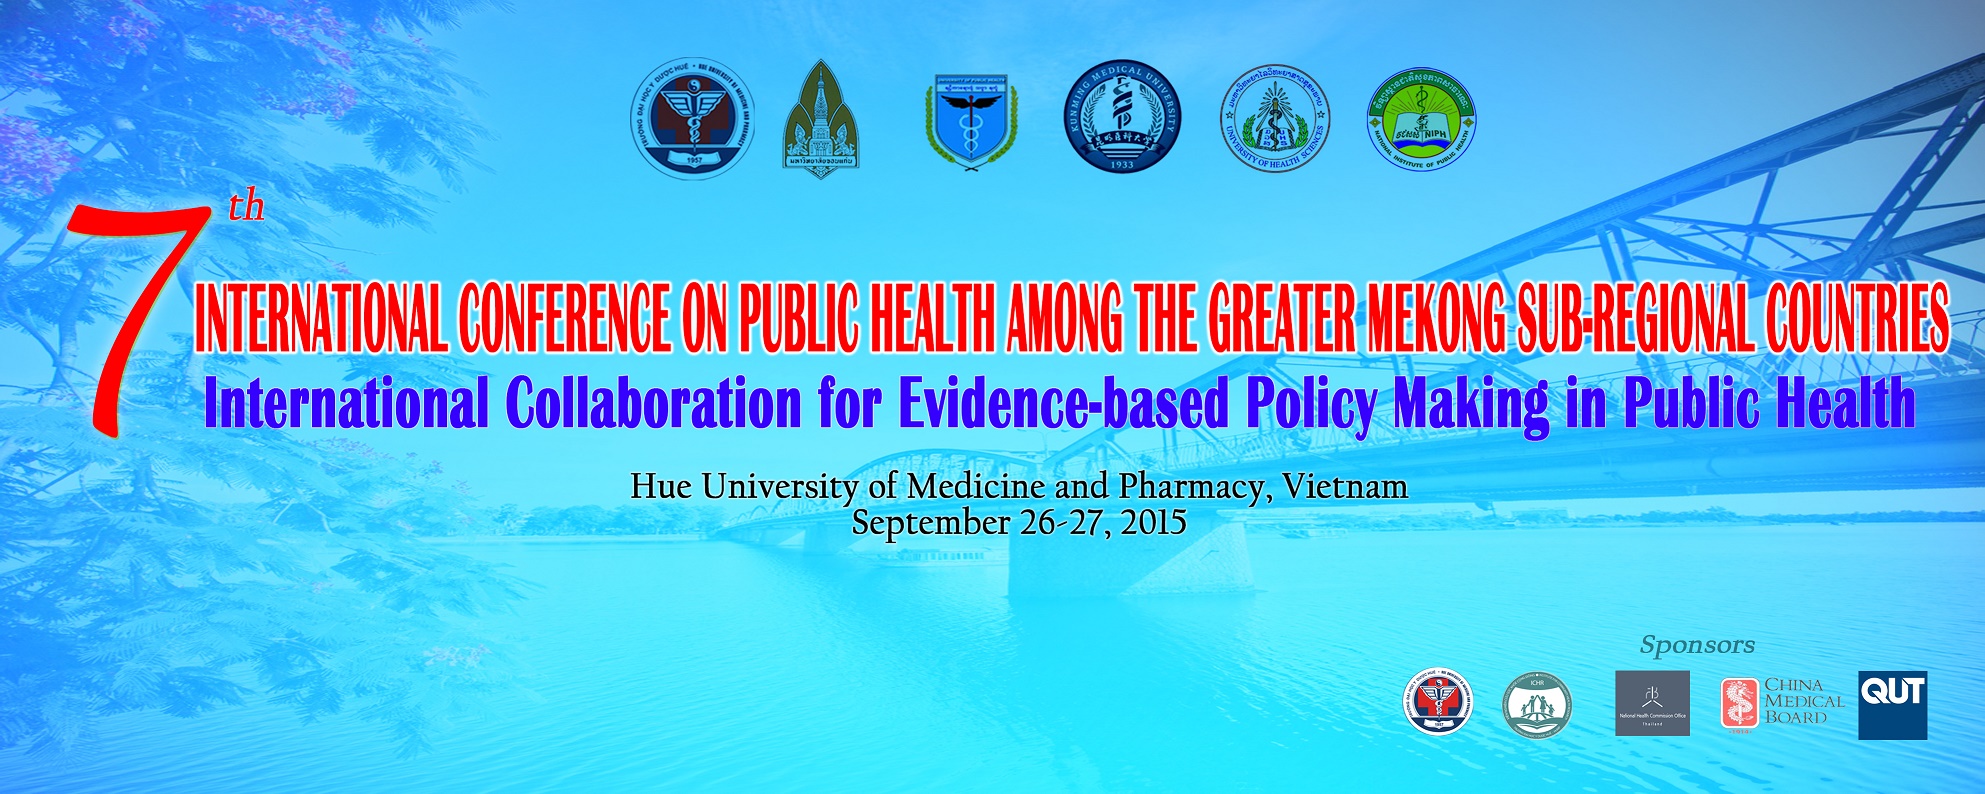 The 7th International conference on Public Health among GMS countries - THE CONFERENCE PROGRAM